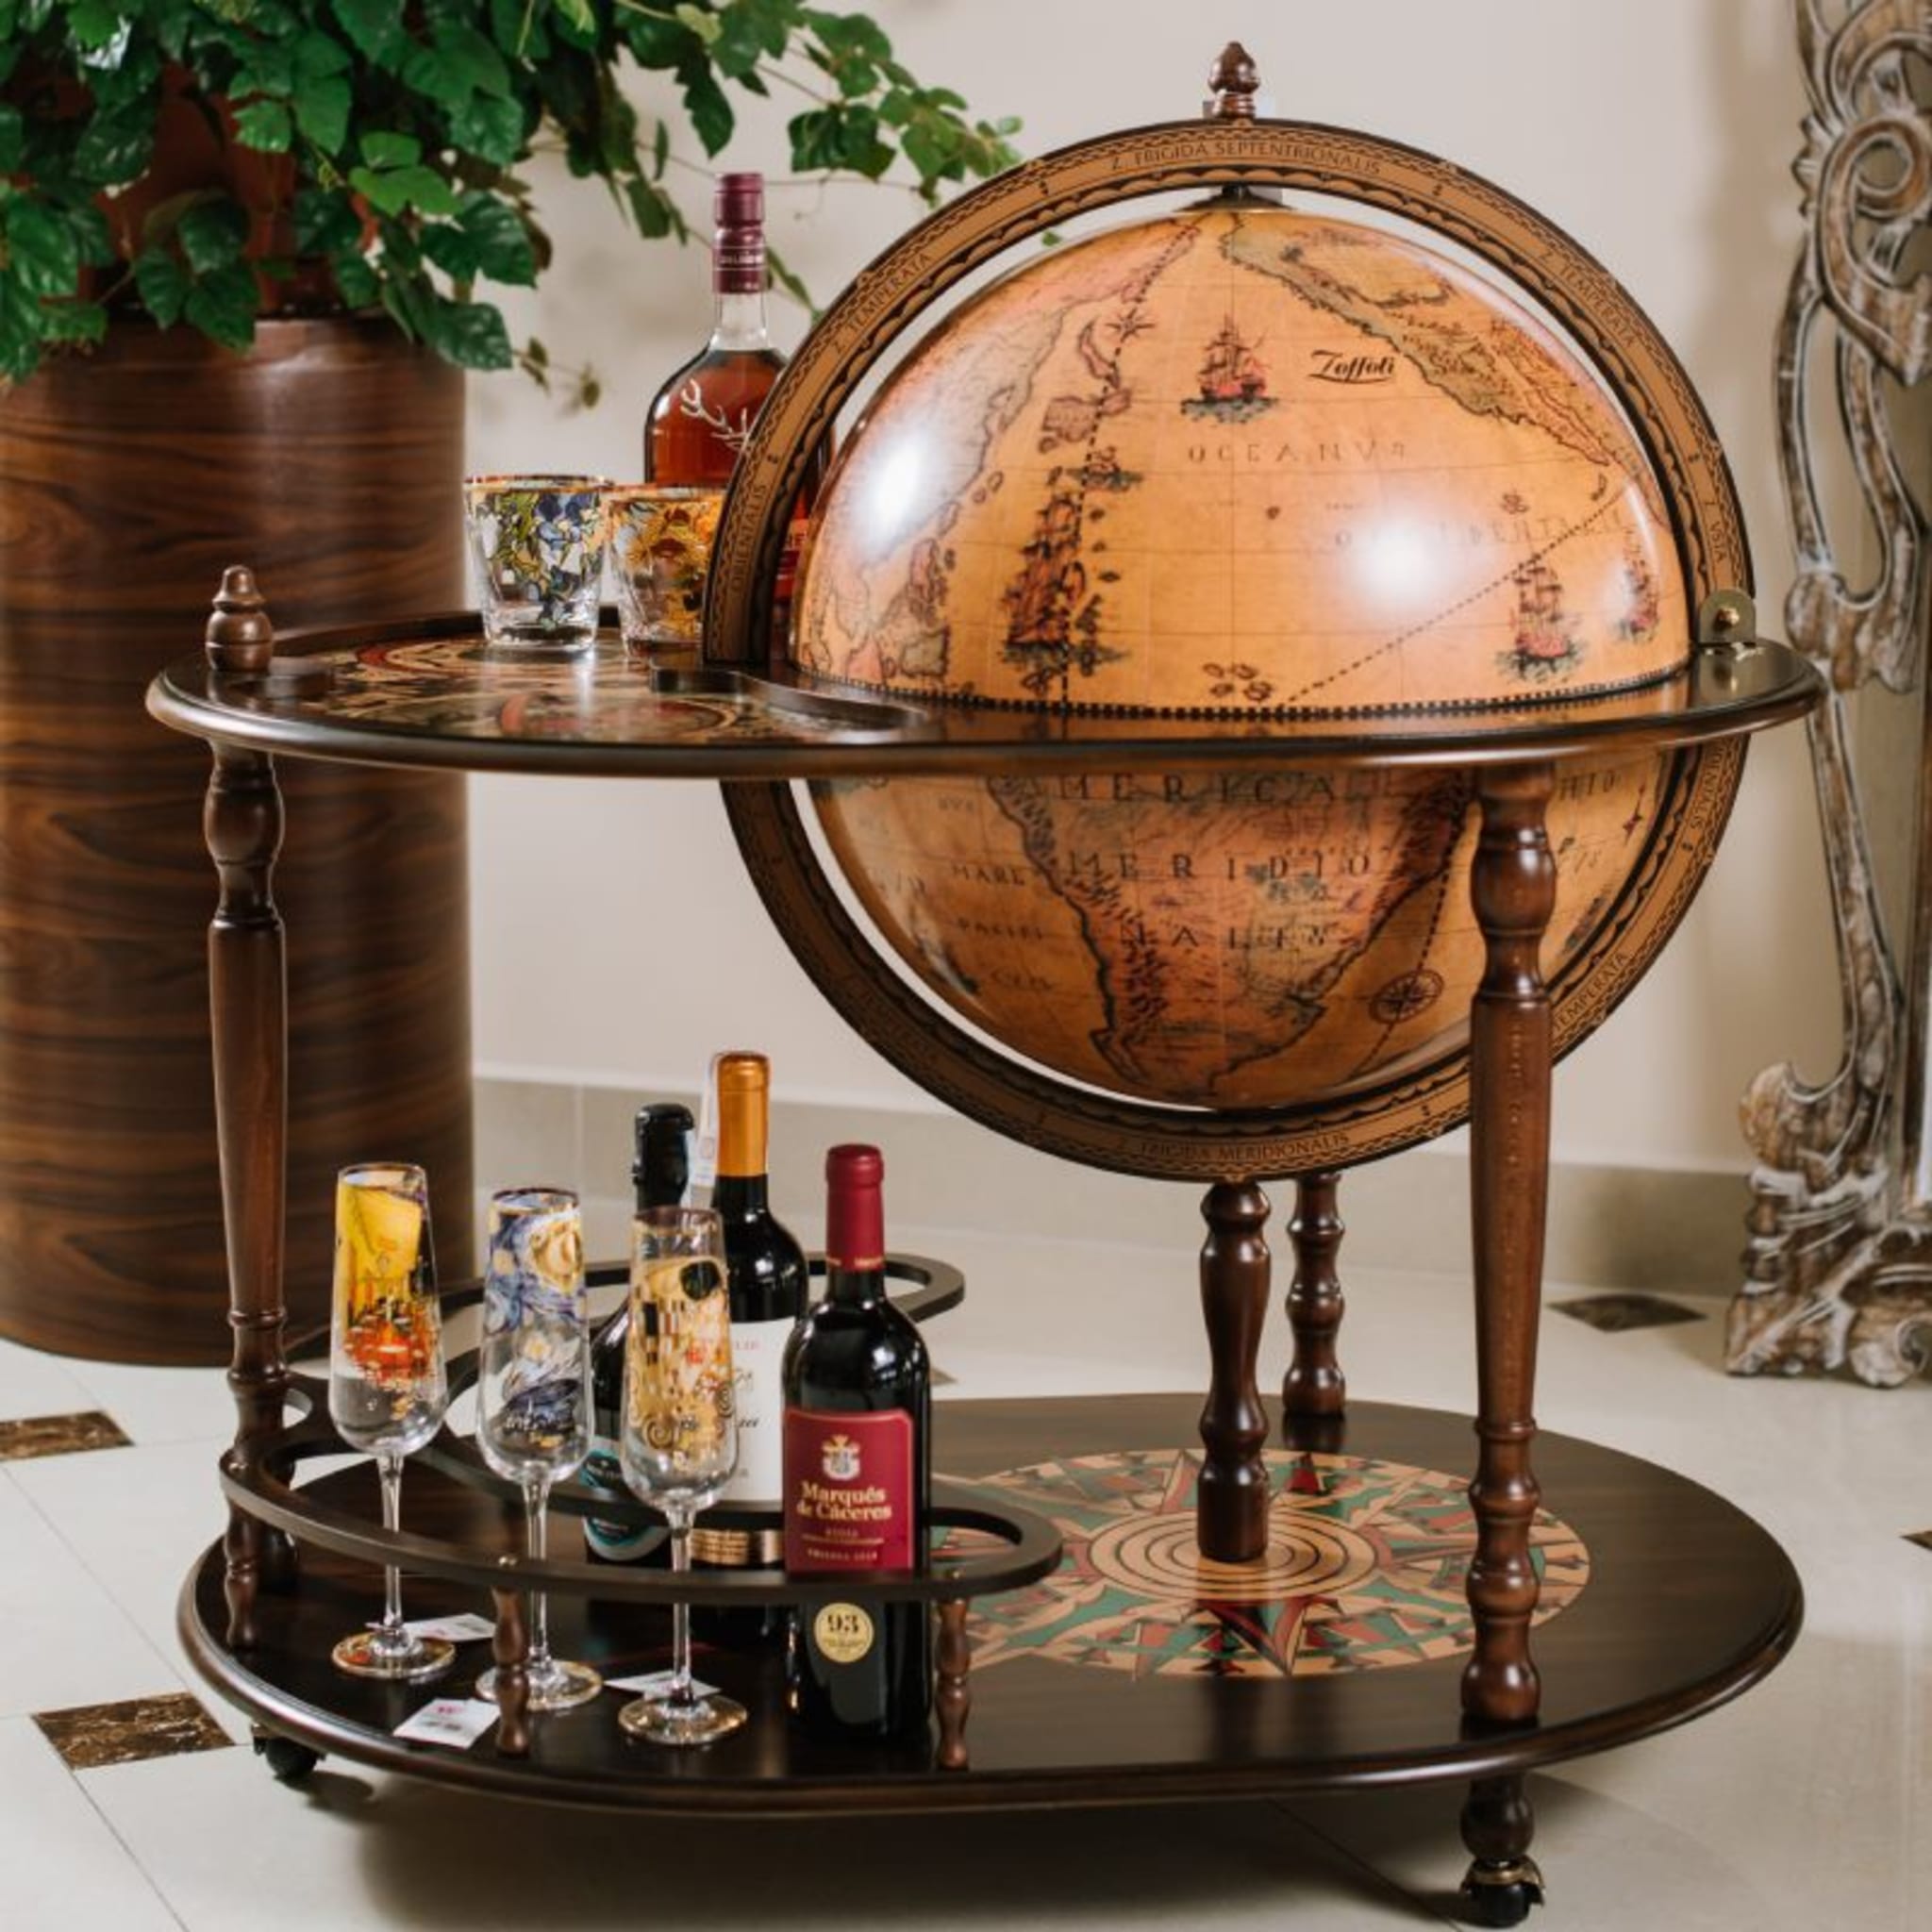 Let this stylish Globe Bar be an impressive and practical piece of furniture in your home decor.